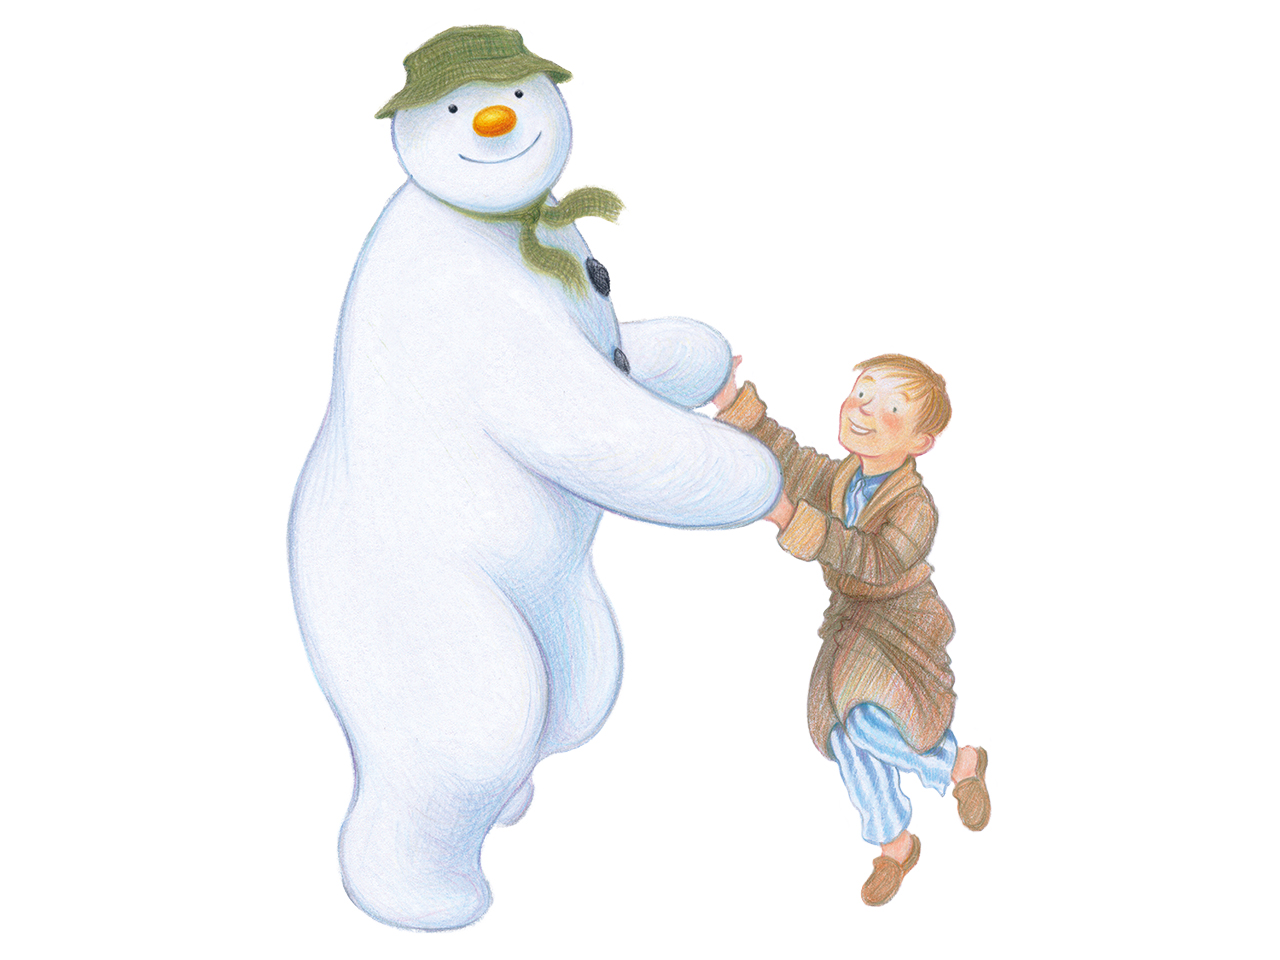 An image of the Snowman and the boy celebrating Oscar nomination